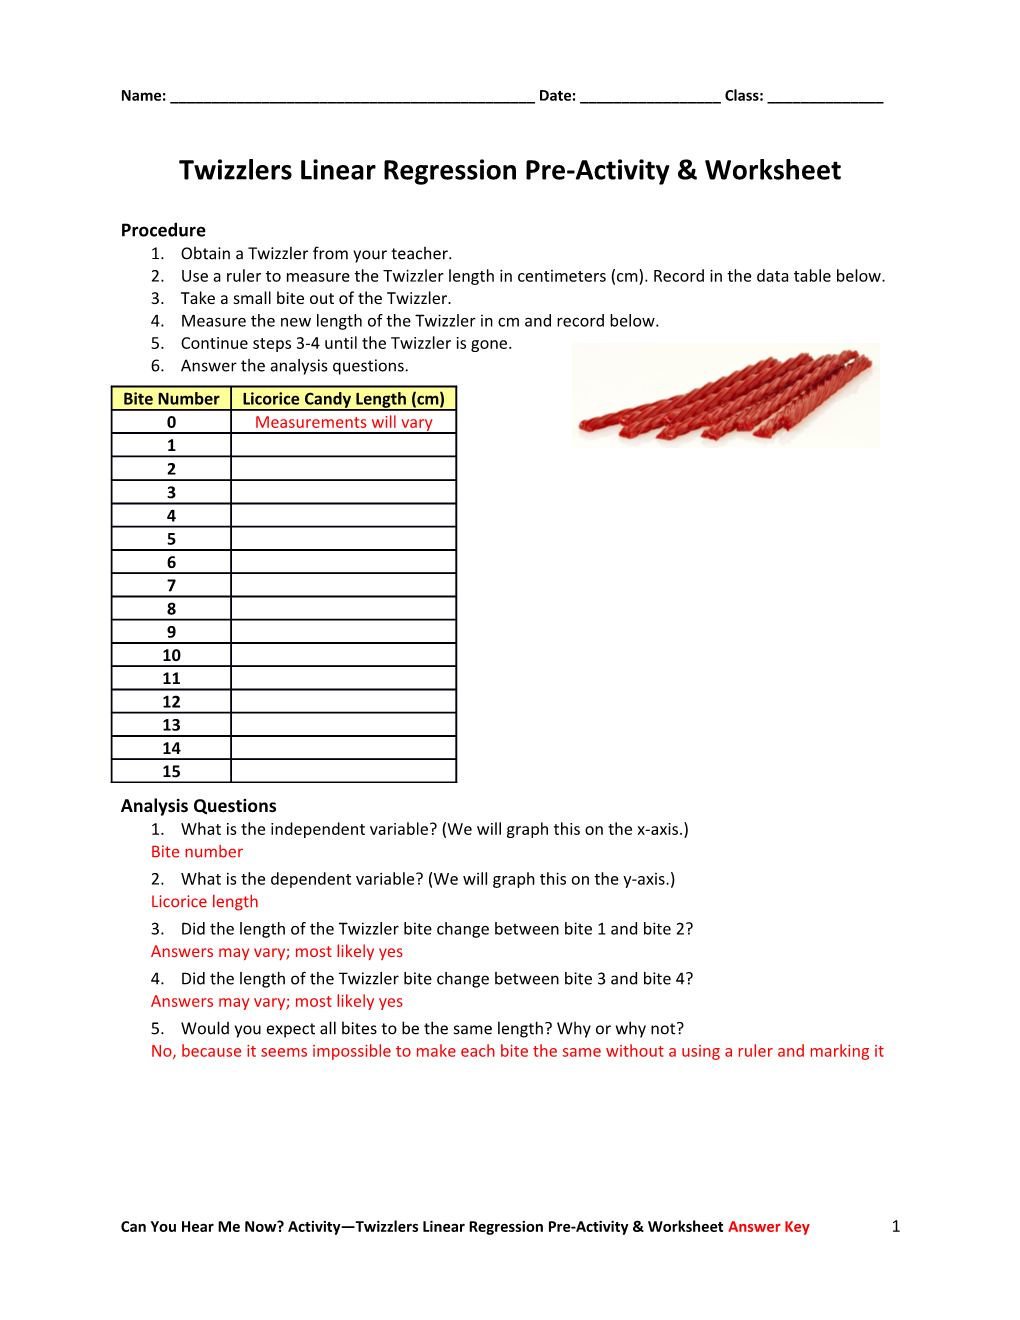 Twizzlers Linear Regression Pre-Activity & Worksheet